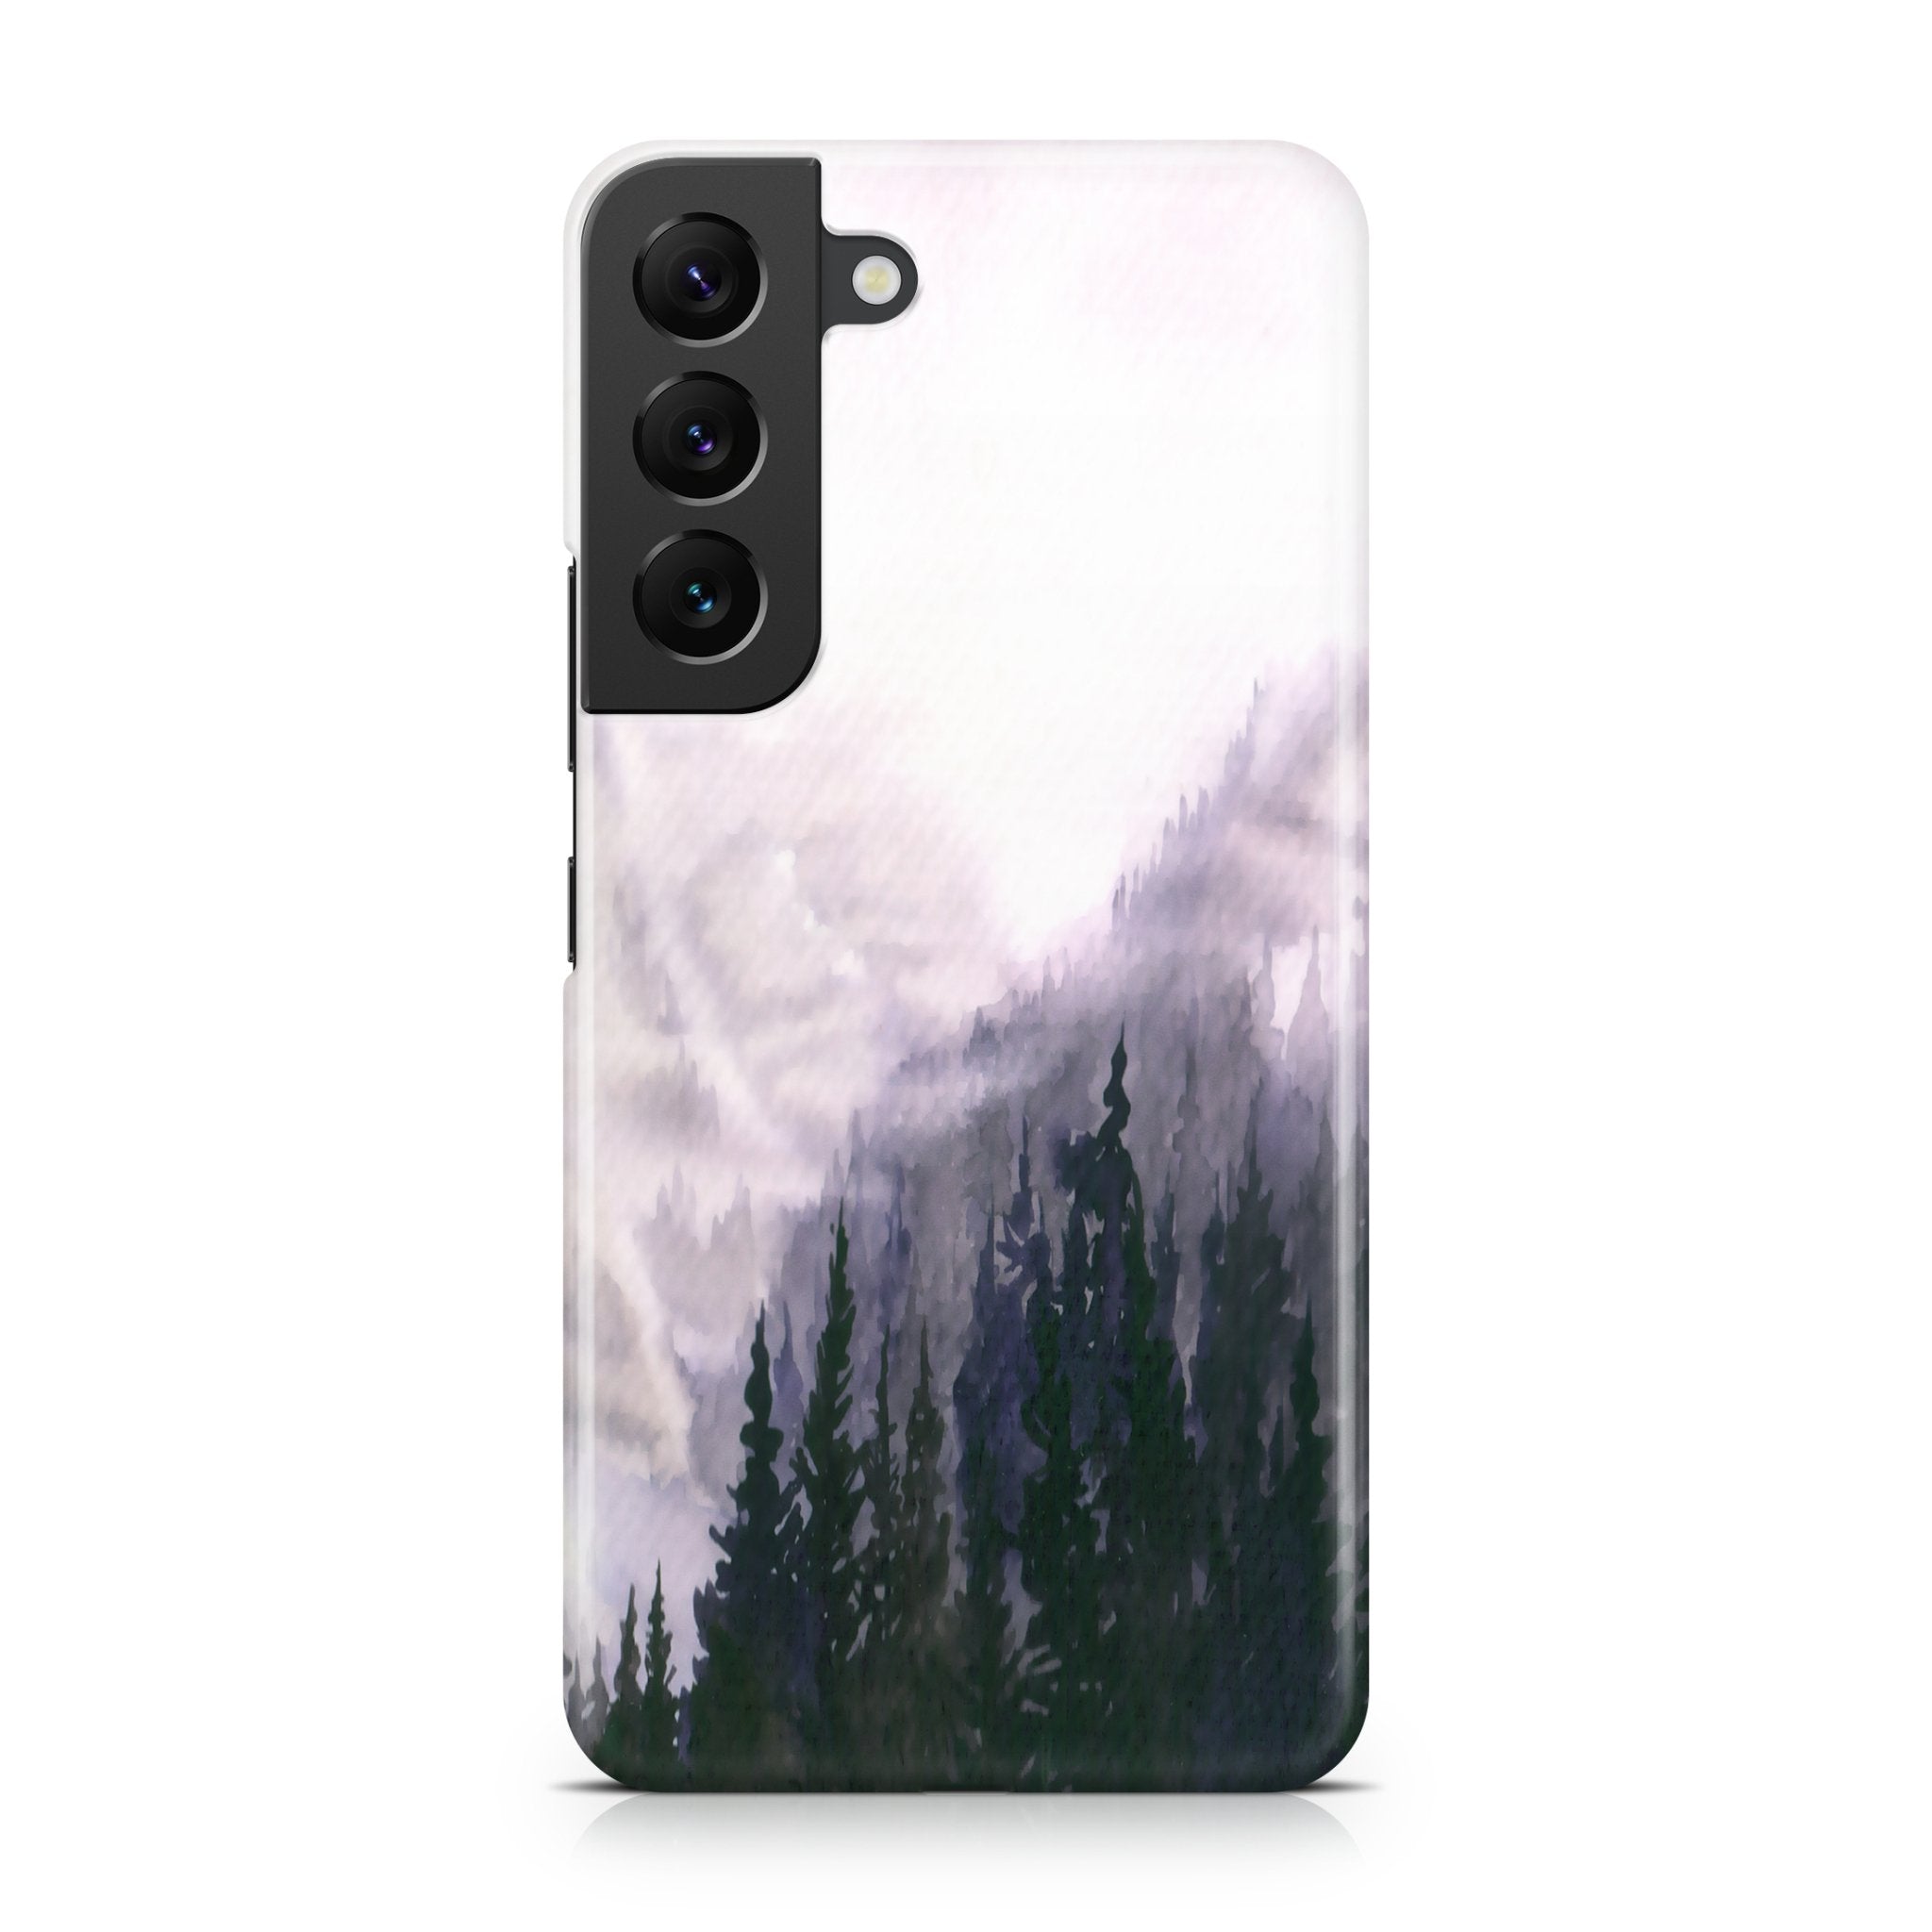 Foggy Morning - Samsung phone case designs by CaseSwagger